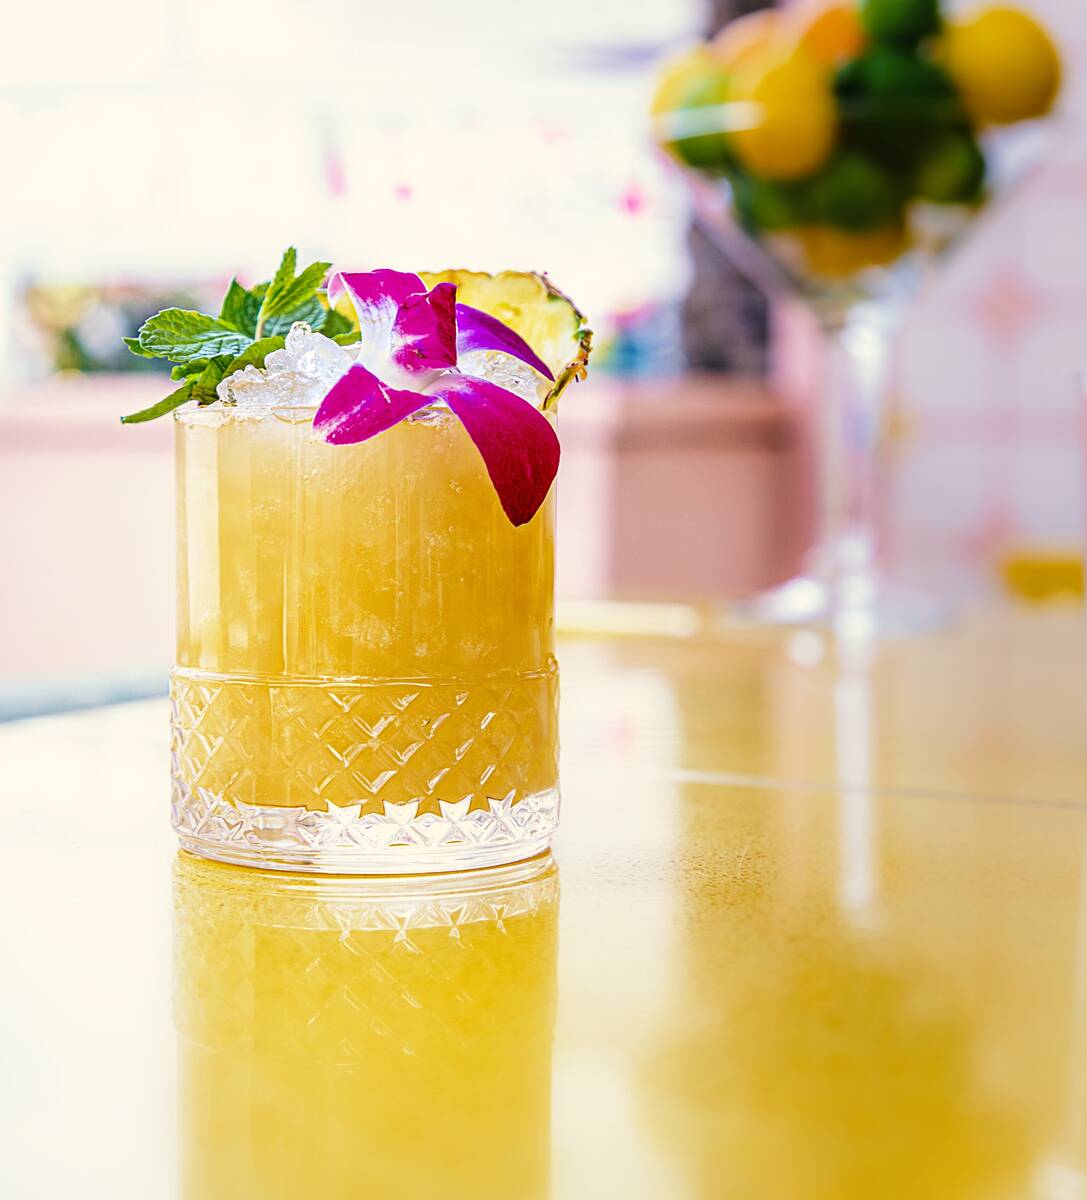 A Surfrider Mai Tai from Rhumbar Tropical Ultra Lounge in The Mirage. (Credit The Mirage)